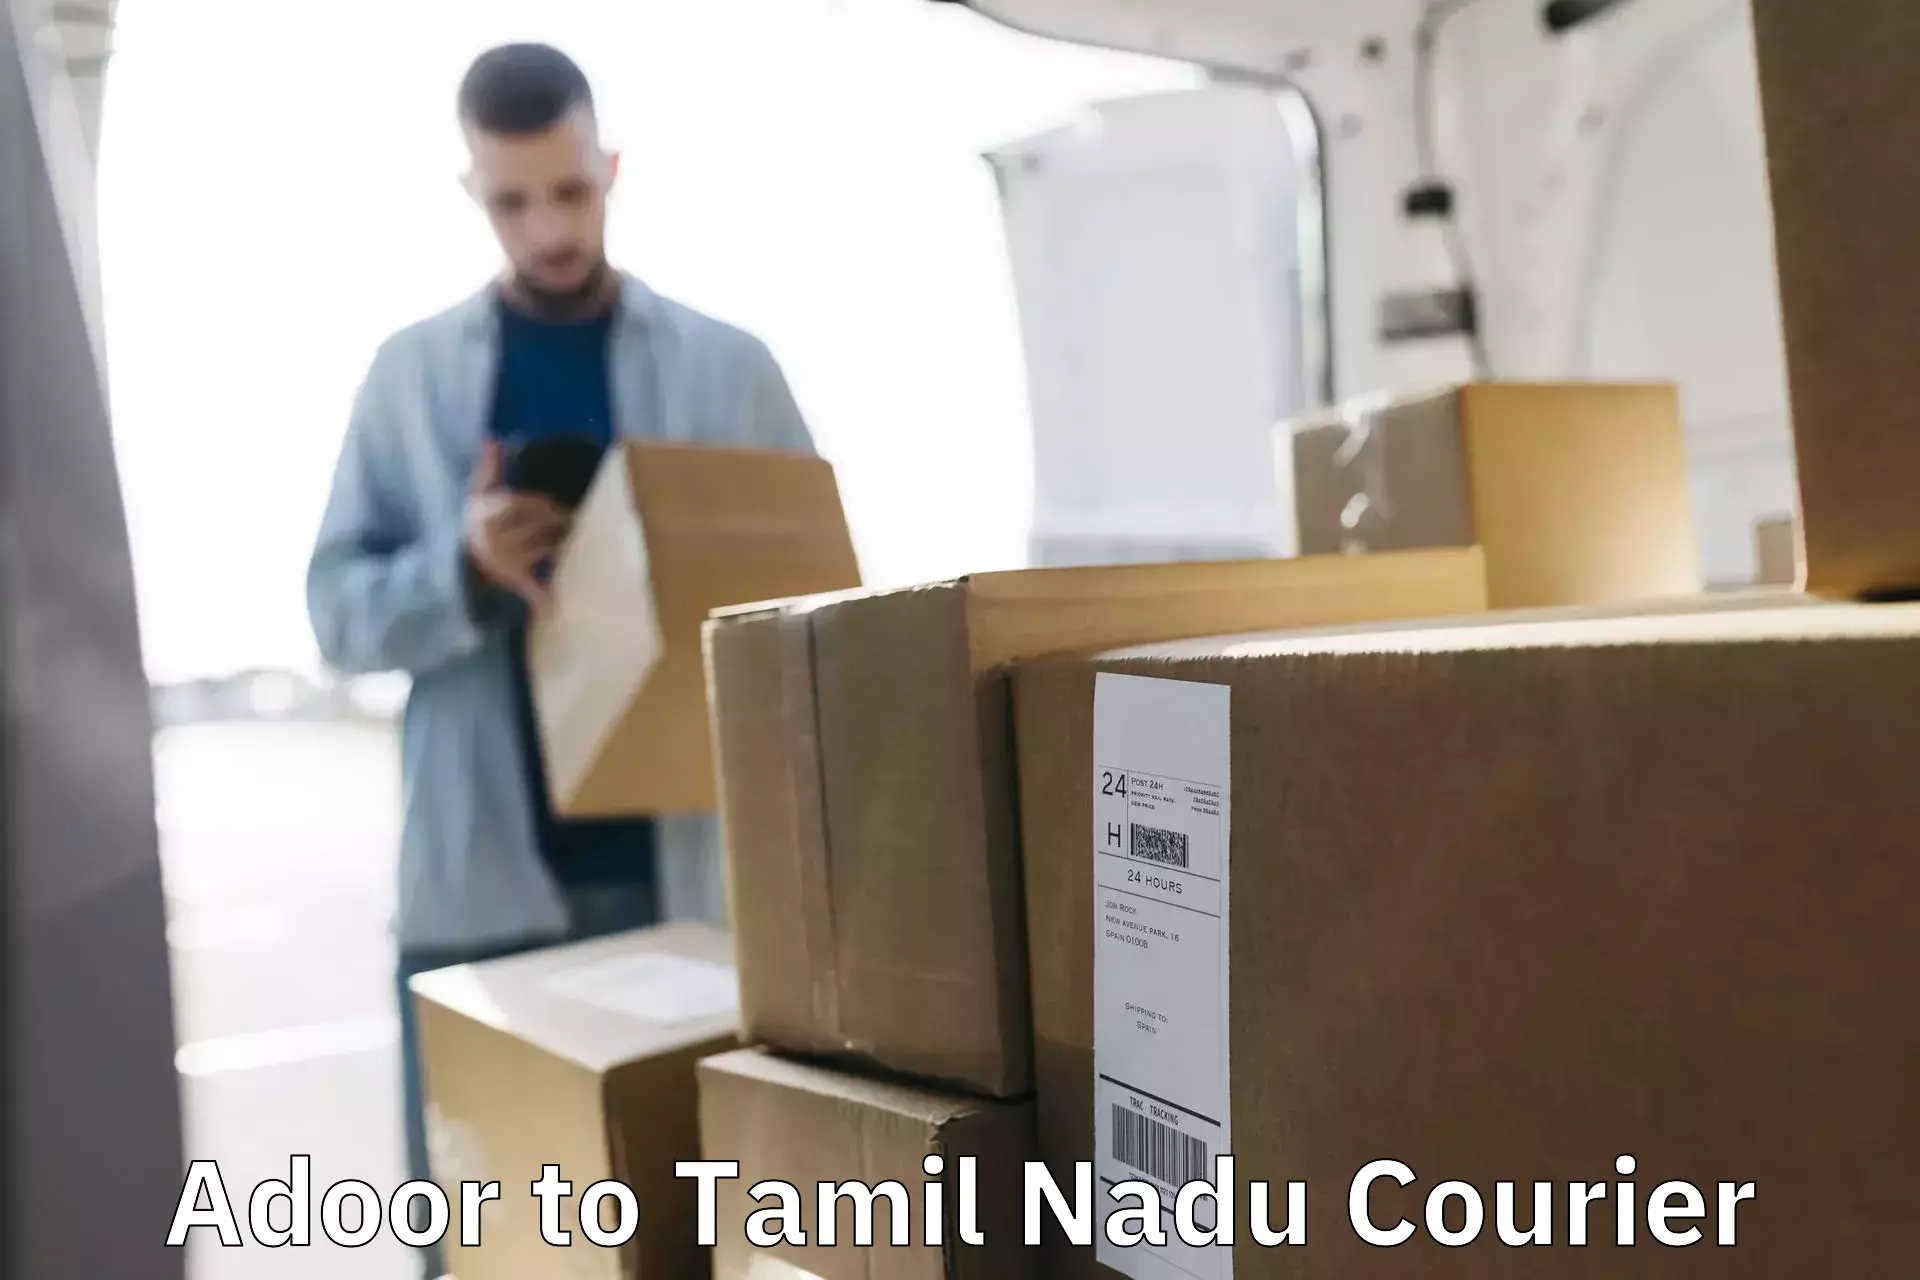 Express package services Adoor to Tamil Nadu